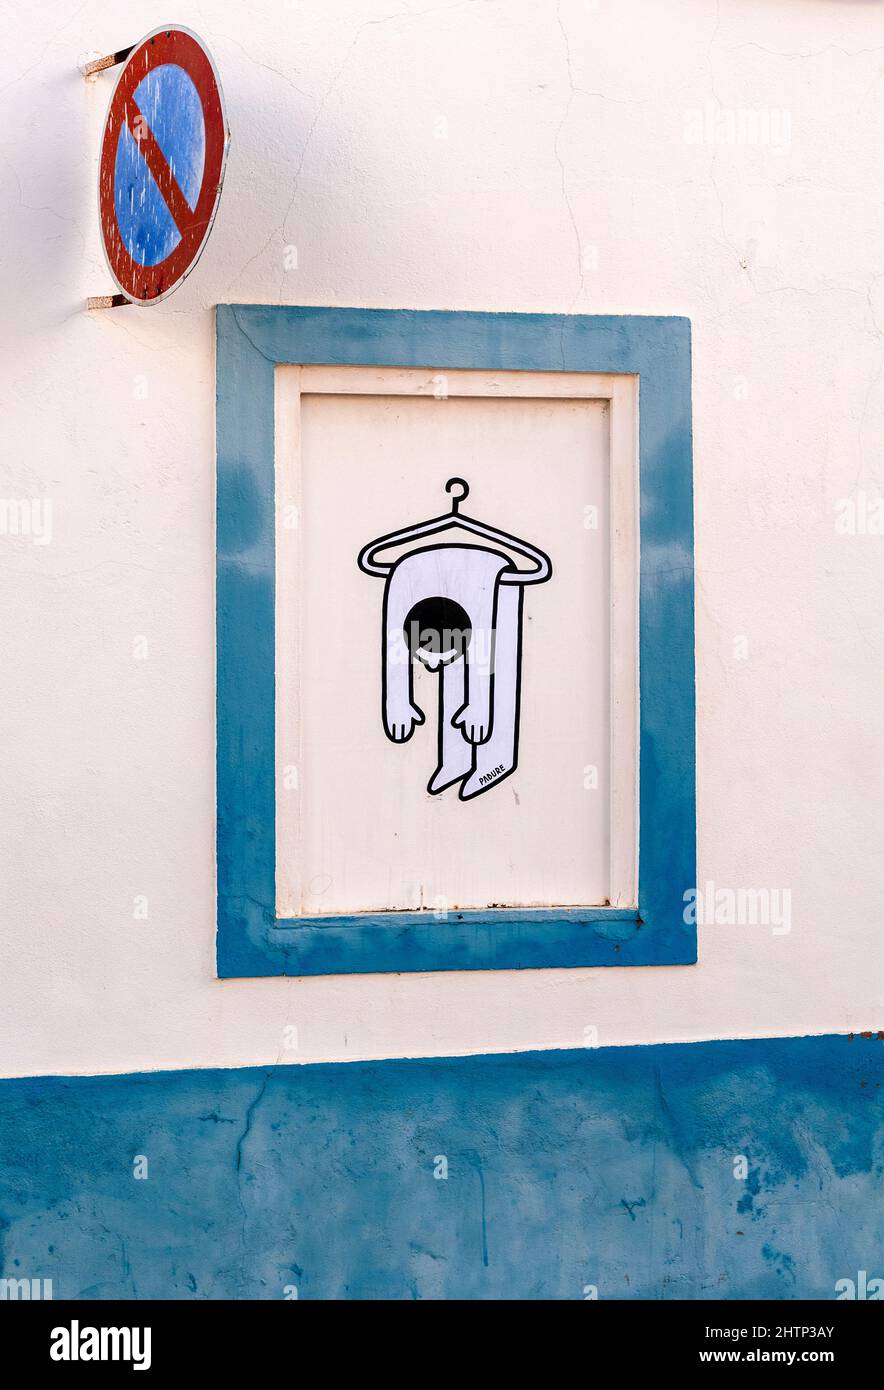 Quirky stencilled art added to a window frame -  figure of person over a coat-hanger Stock Photo